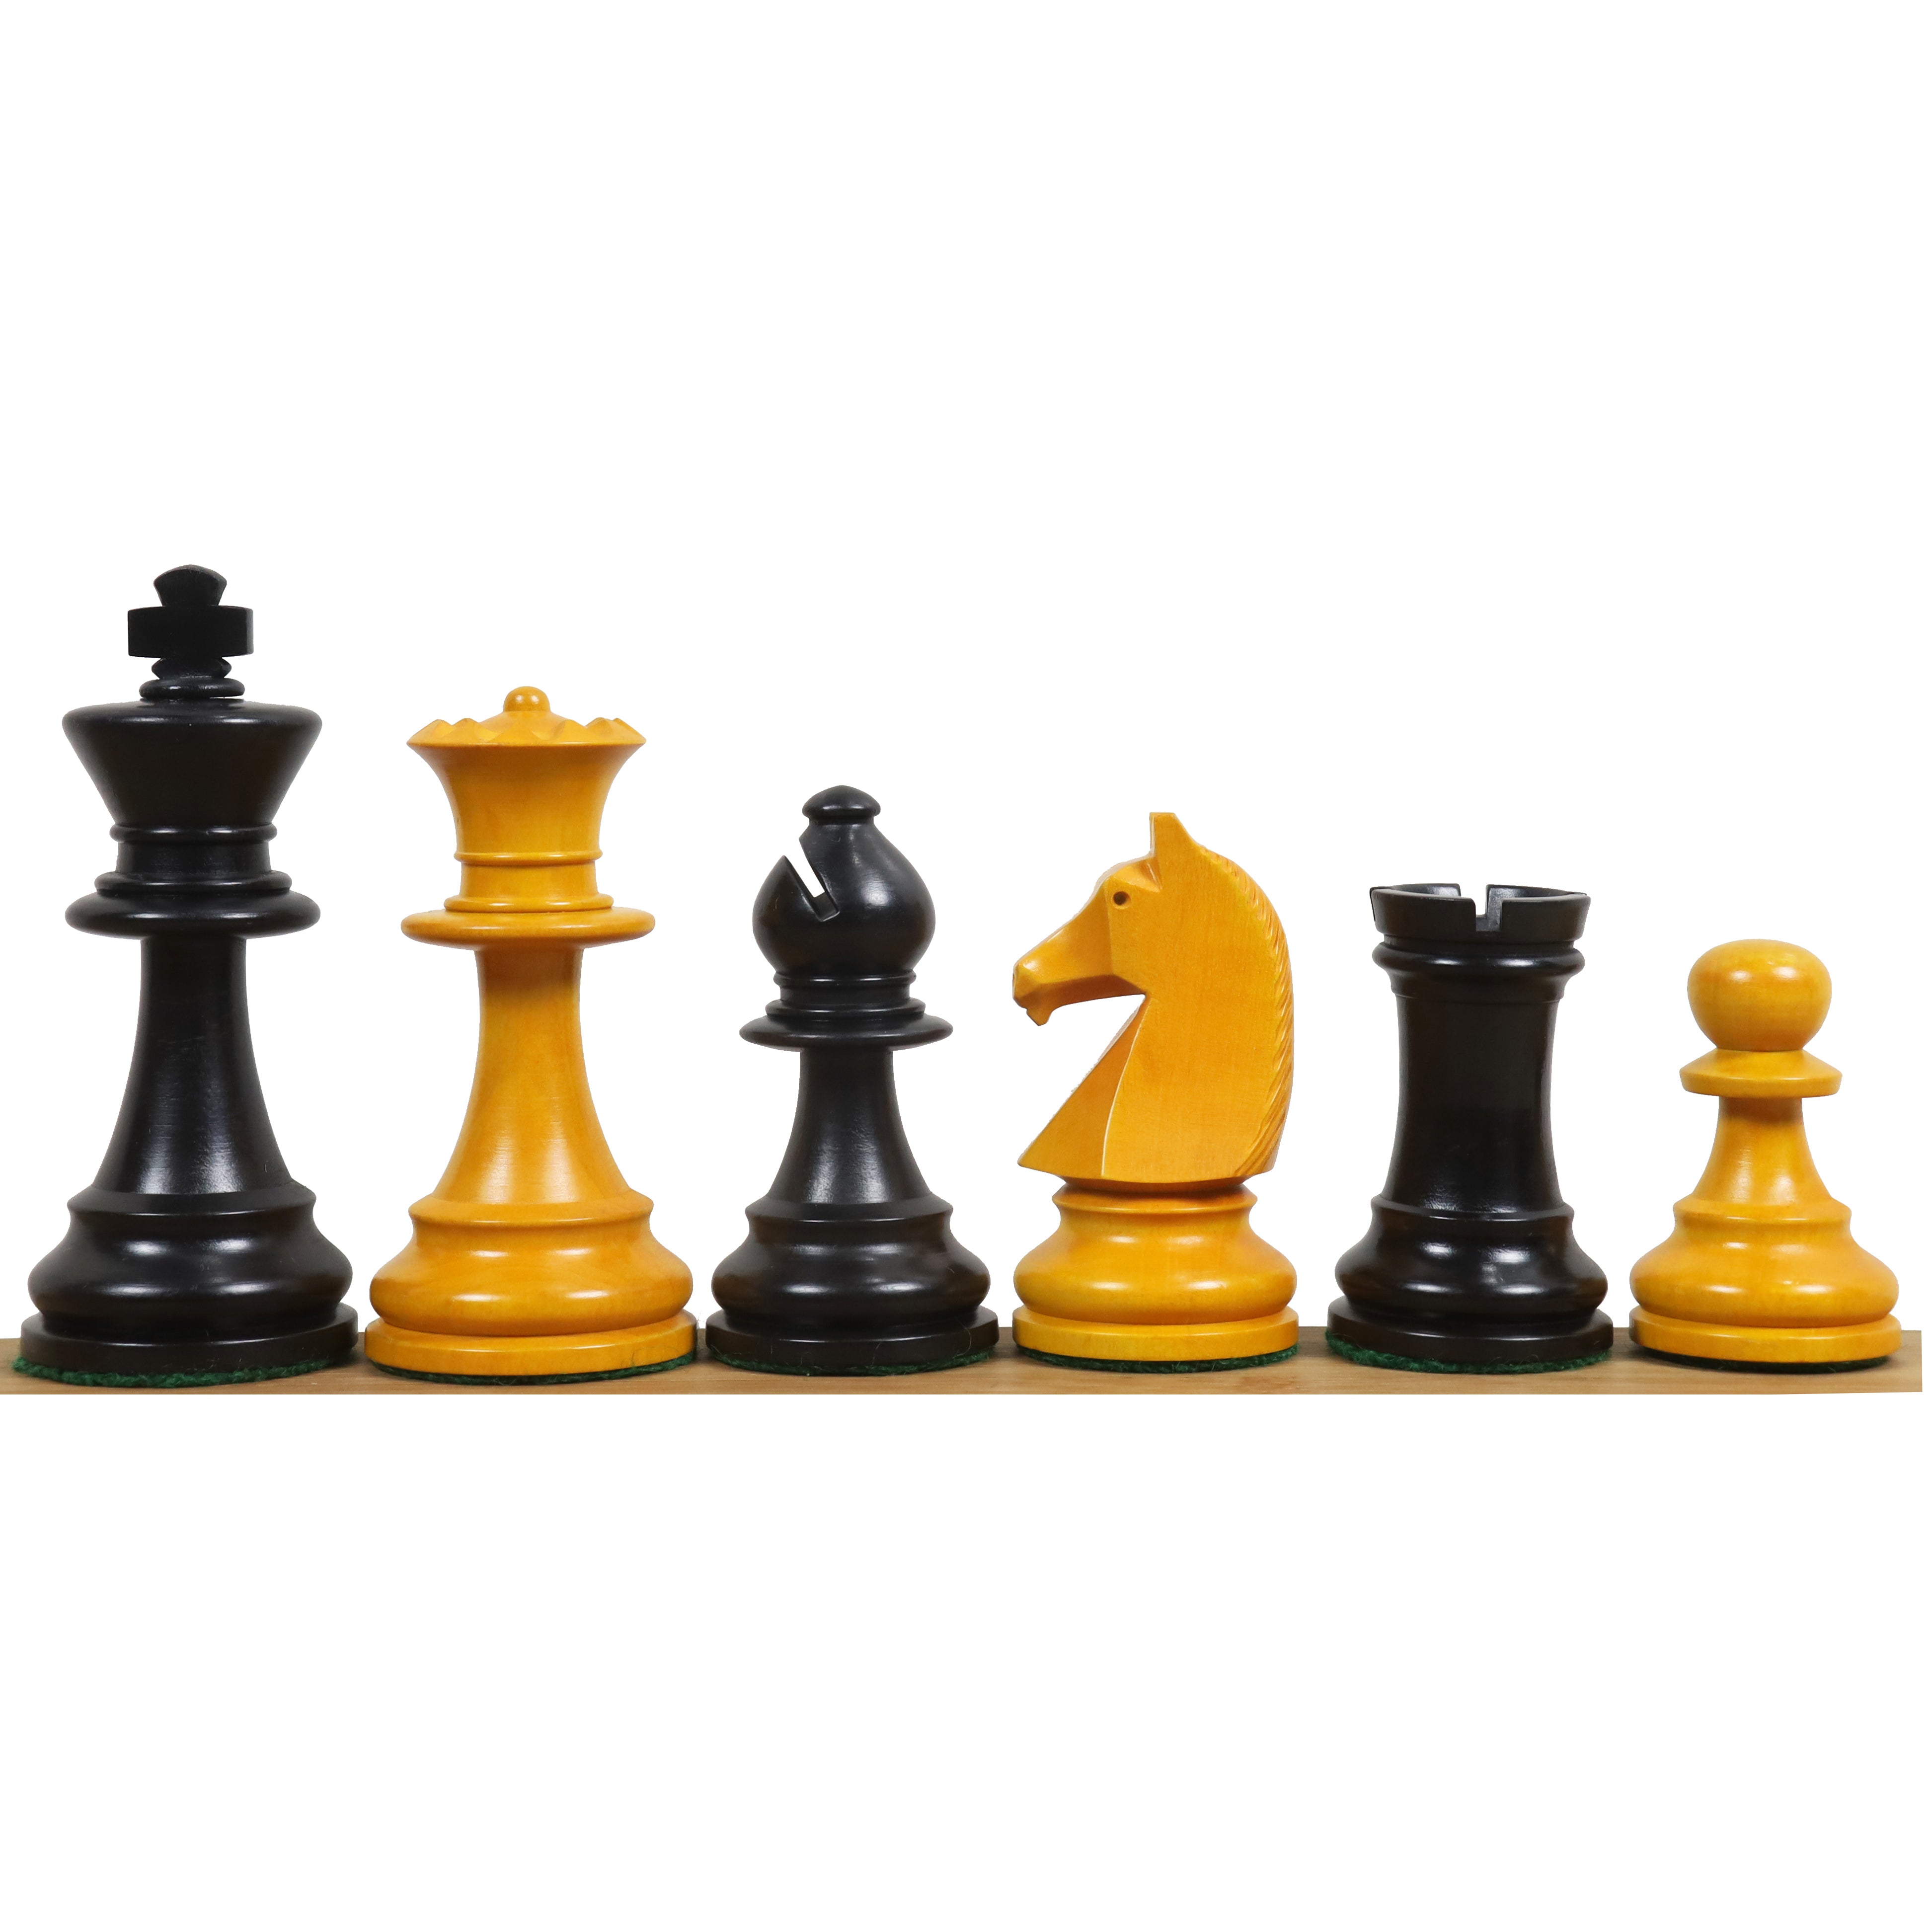 Treasure Chess - Play, create, & collect your favourite games of chess